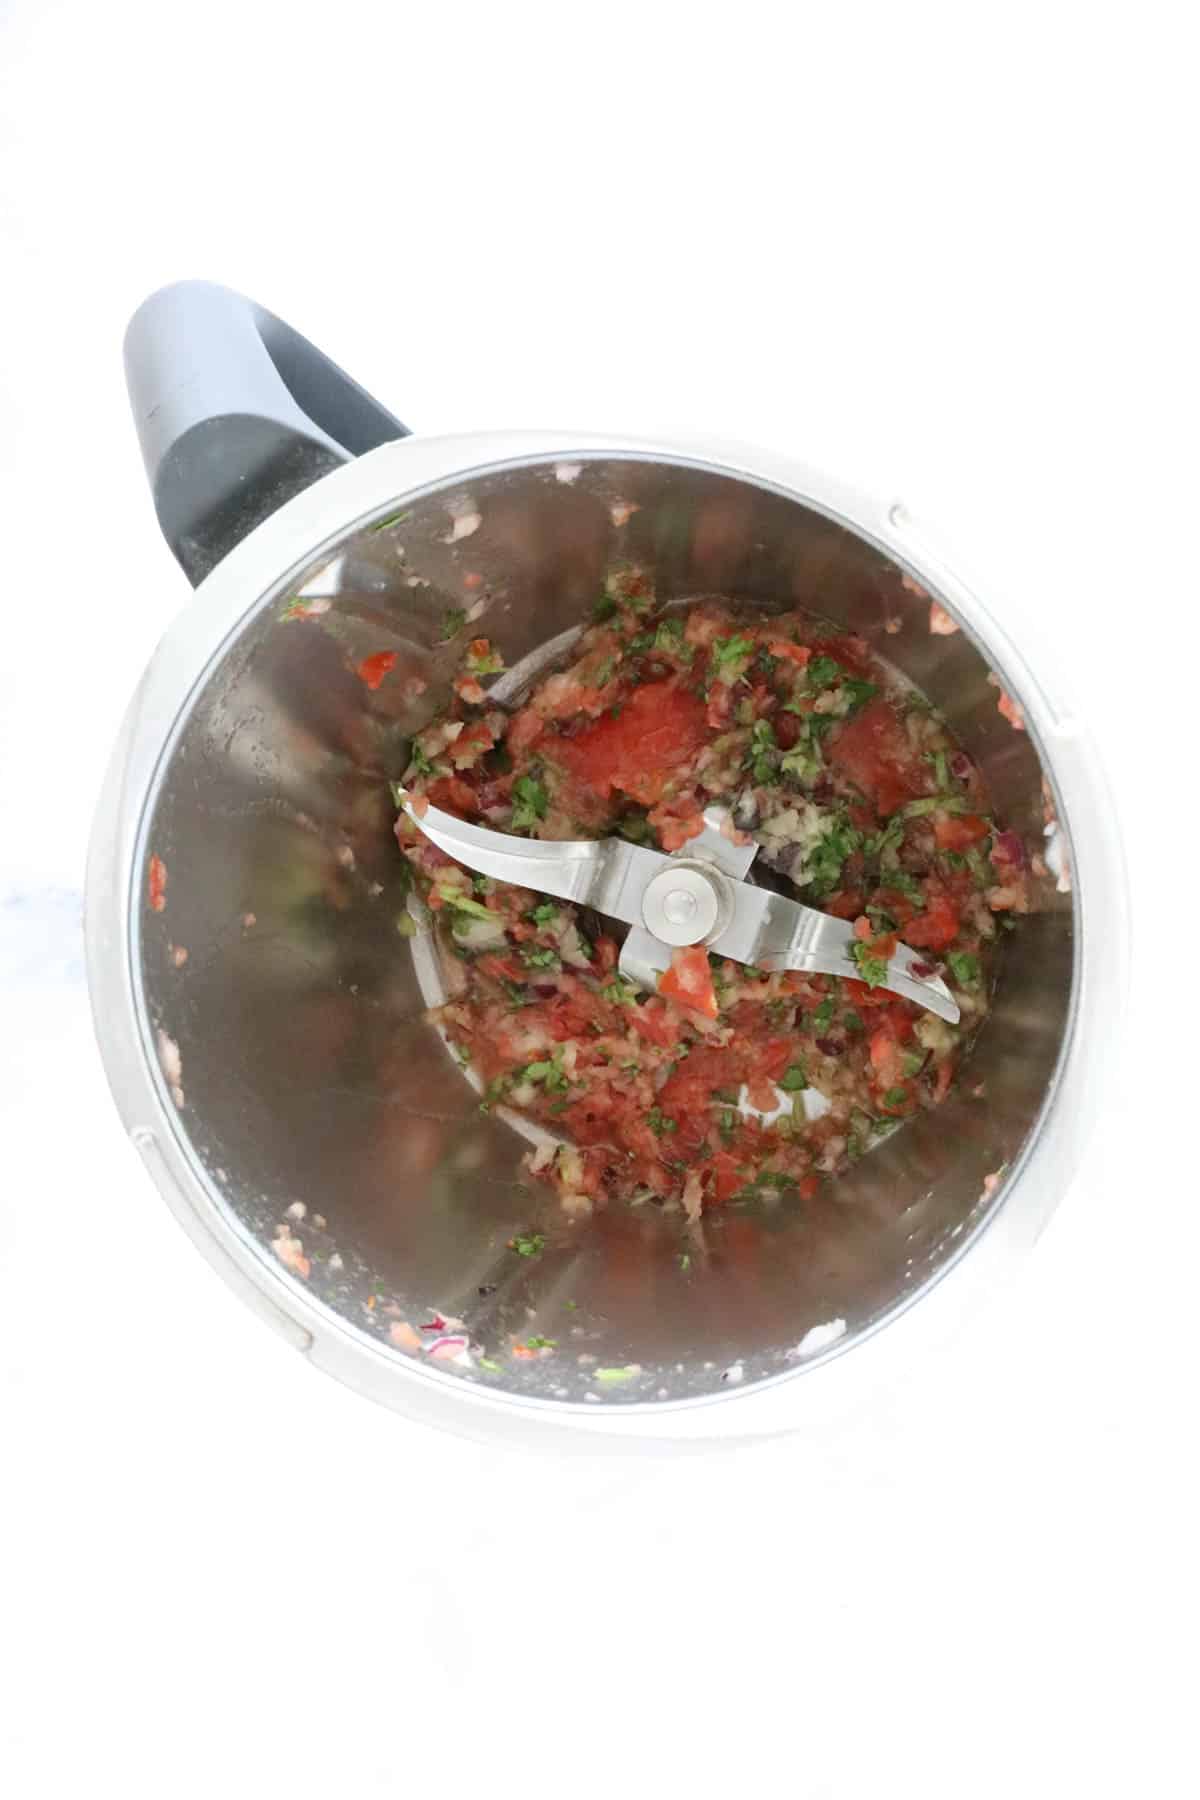 Chopped tomato and herbs in a Thermomix.